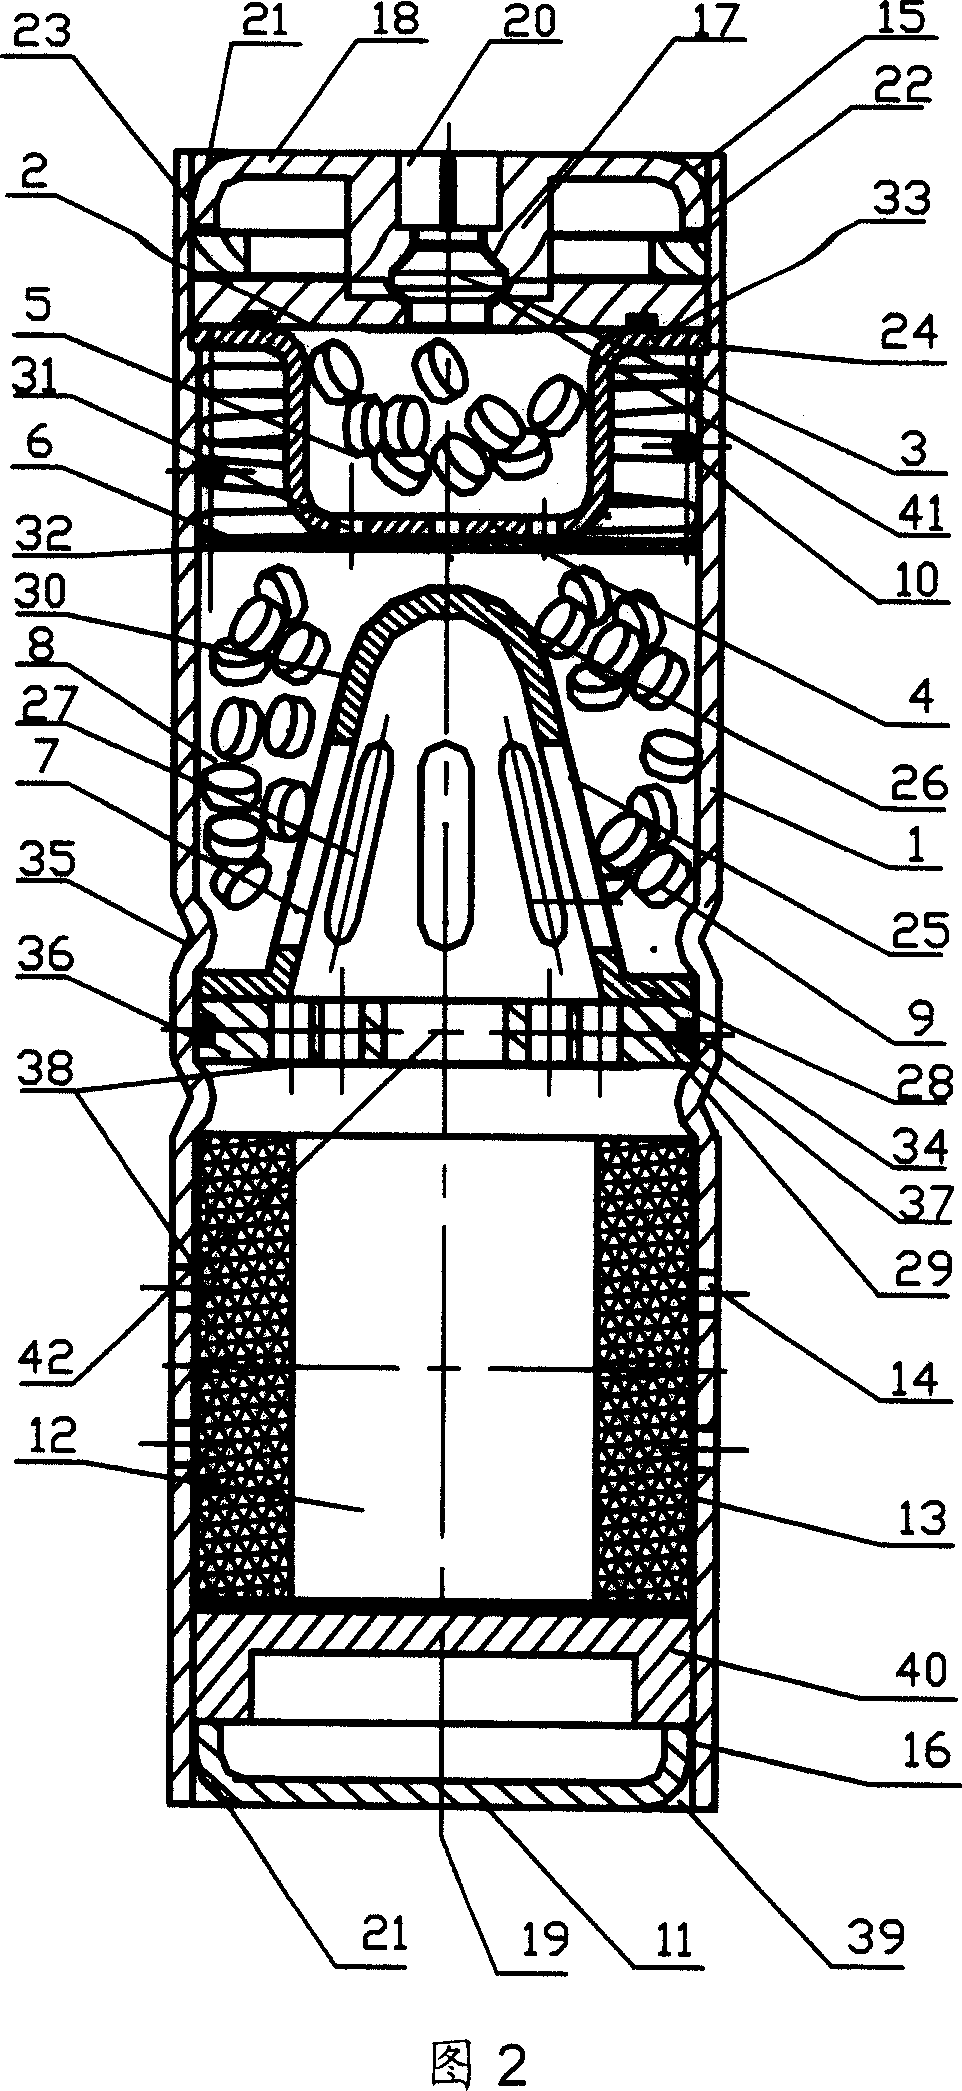 Air generator for seat by a secondary driver